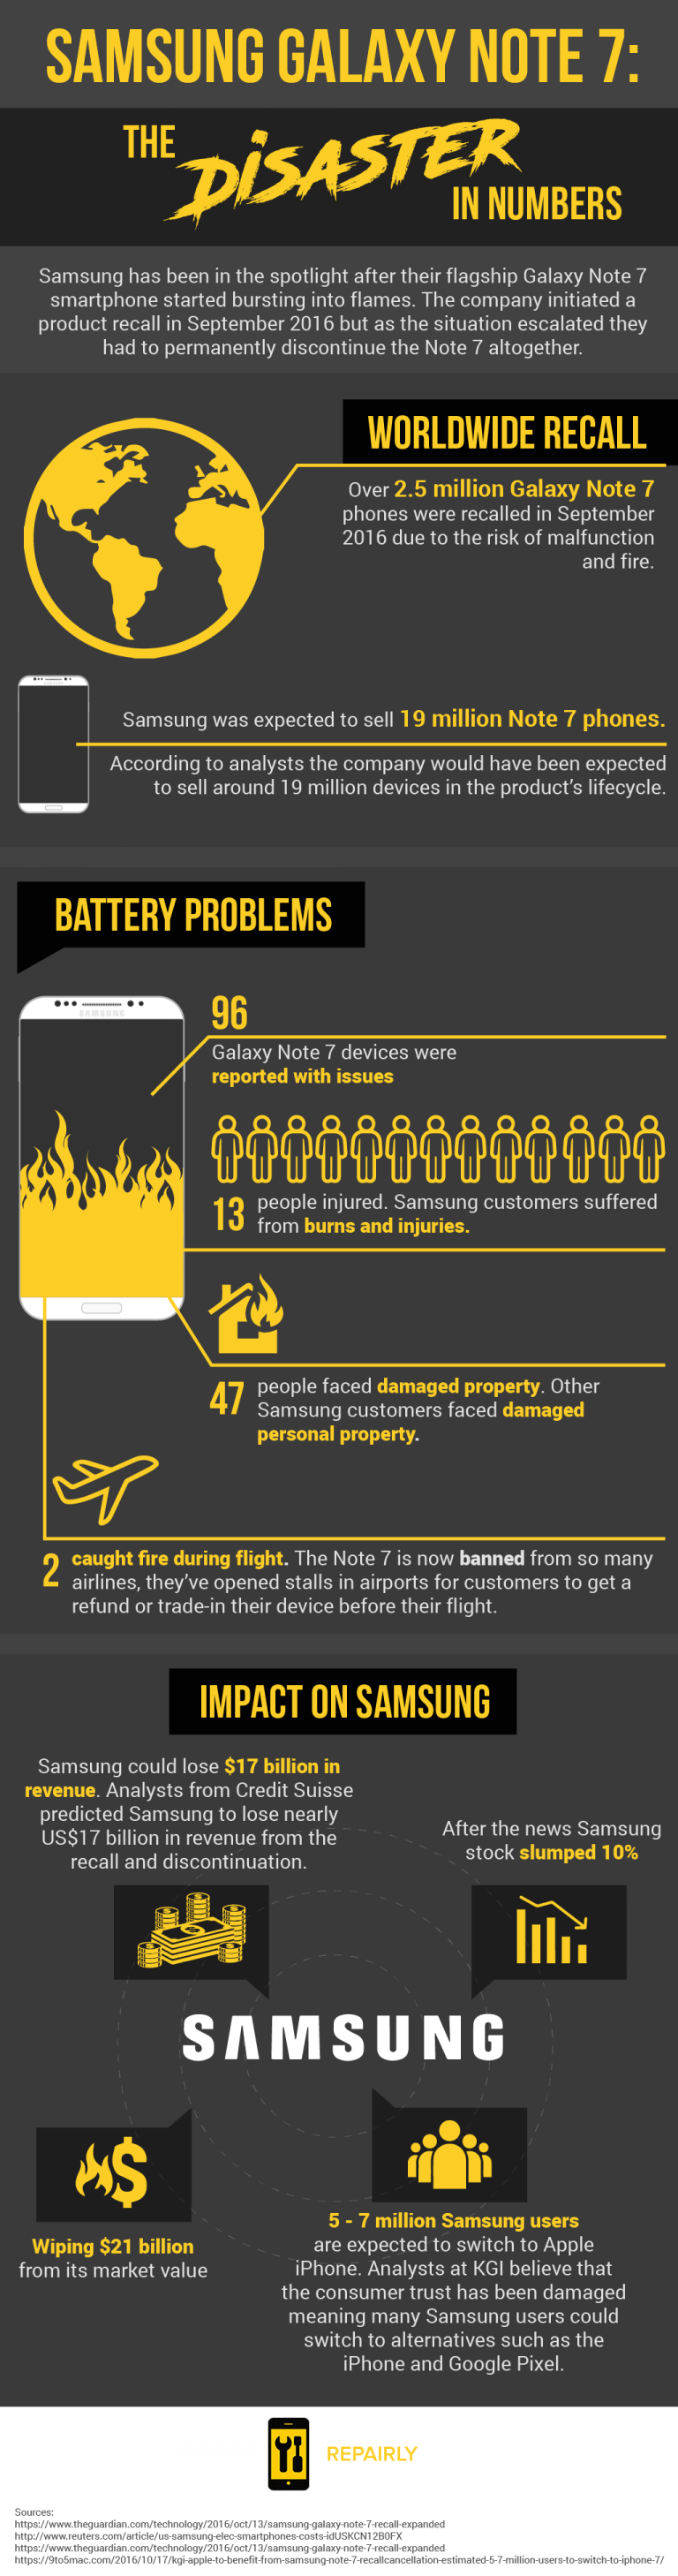 samsung-disaster-in-numbers